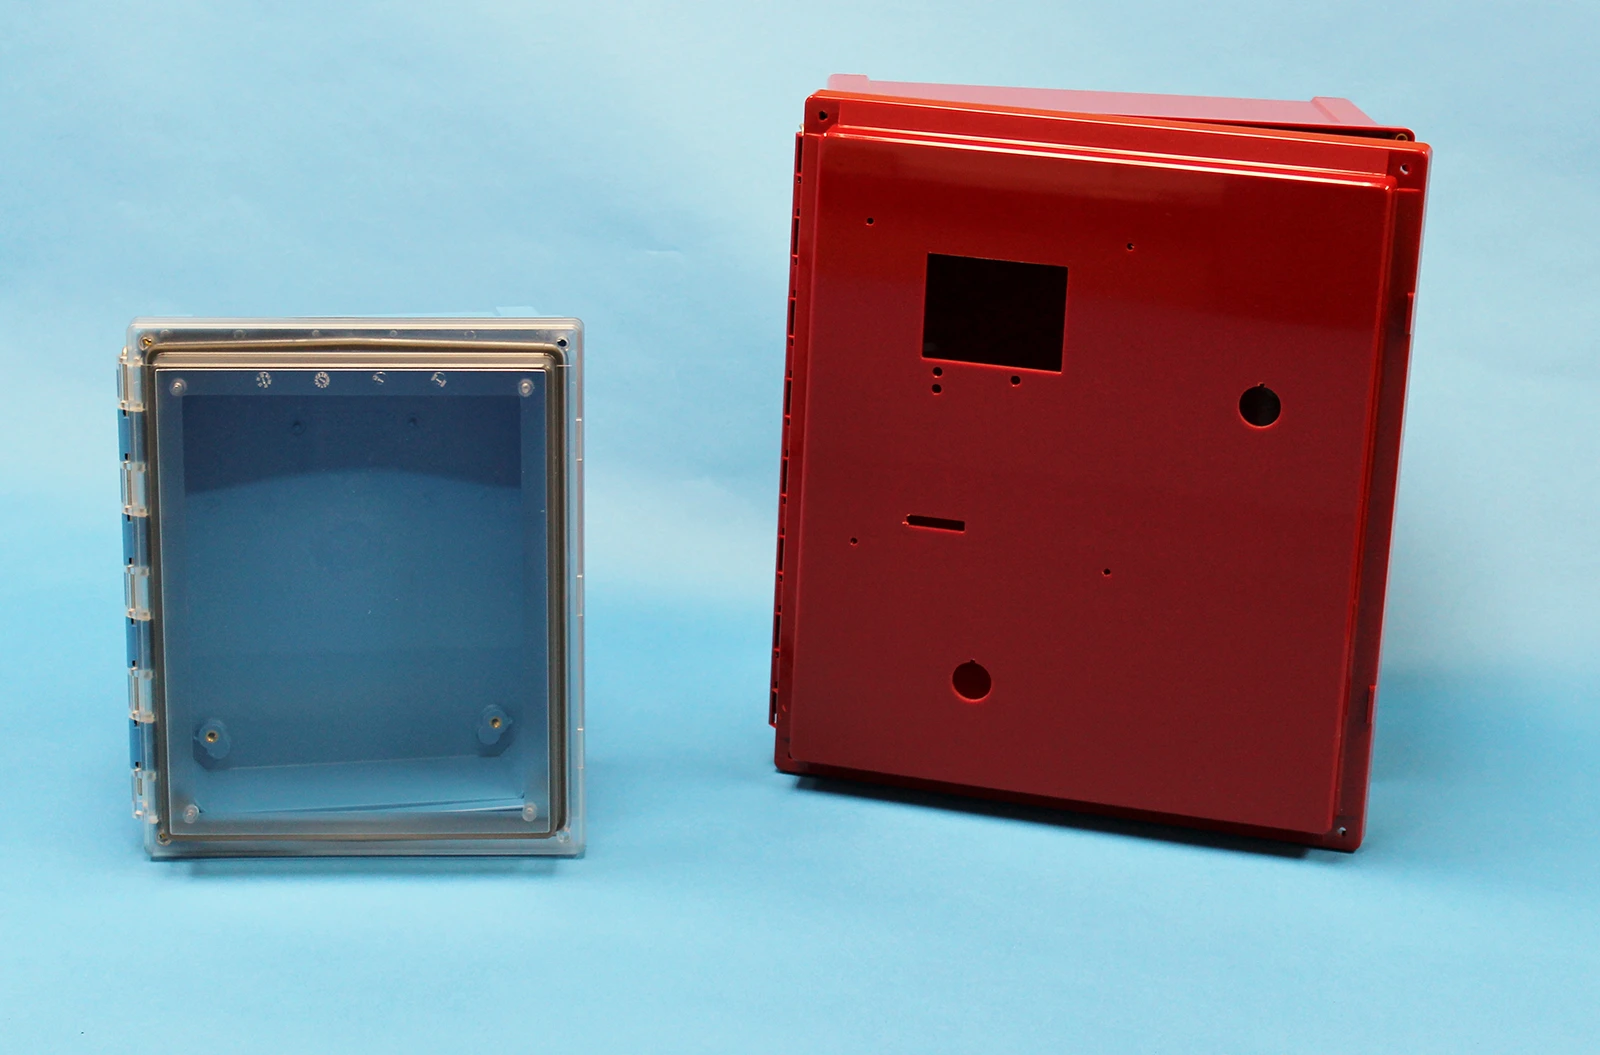 Enclosures with Custom Colors and CNC Cut Out Options